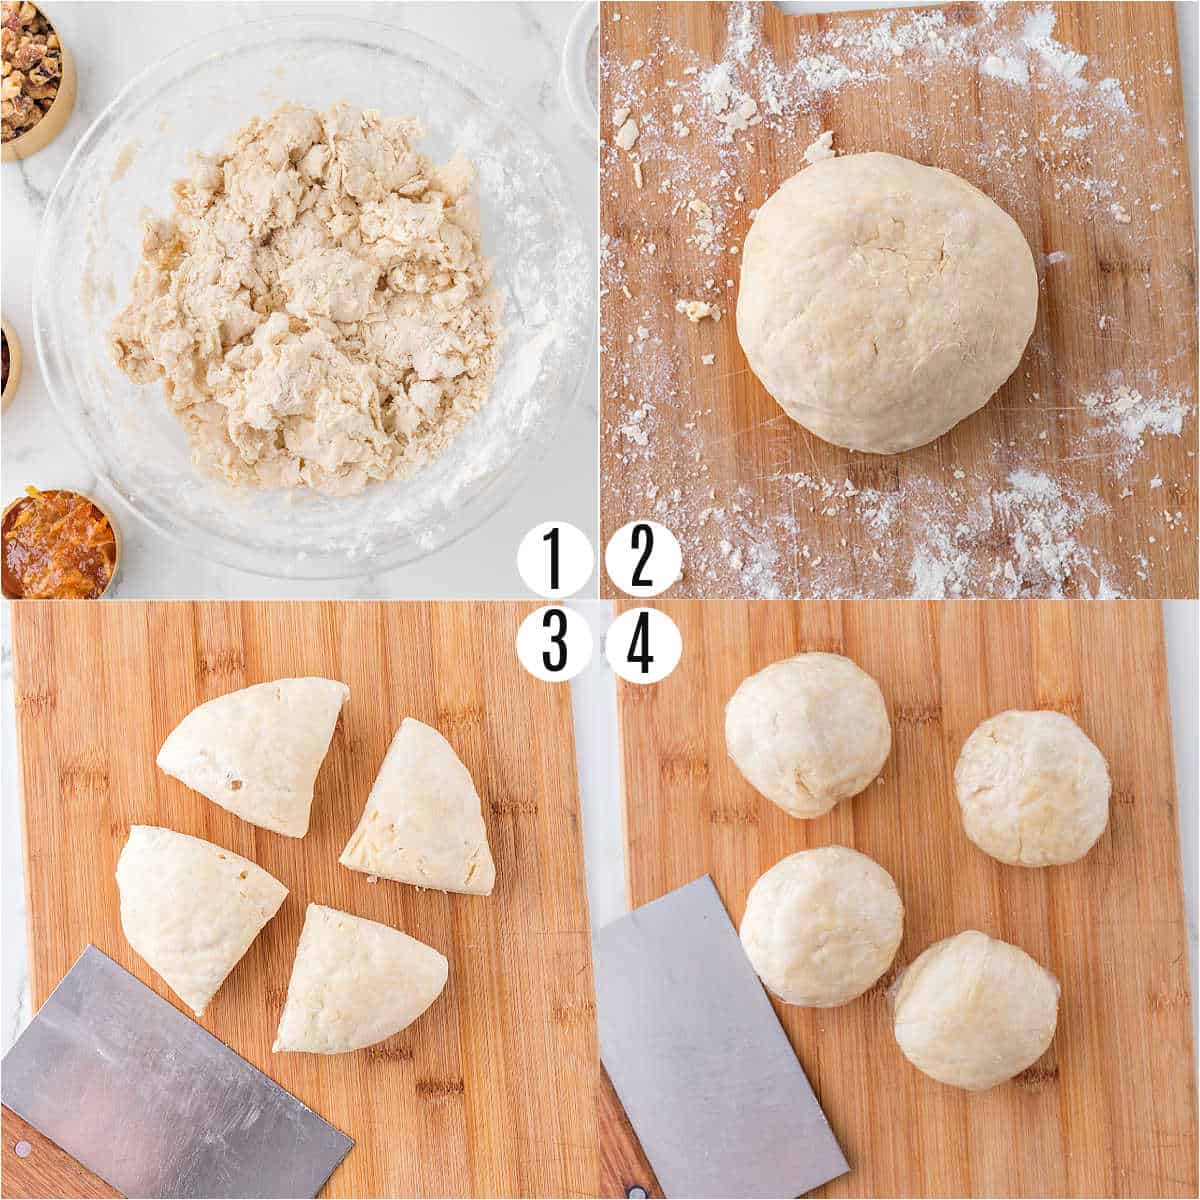 Step by step photos showing how to make rugelach dough.